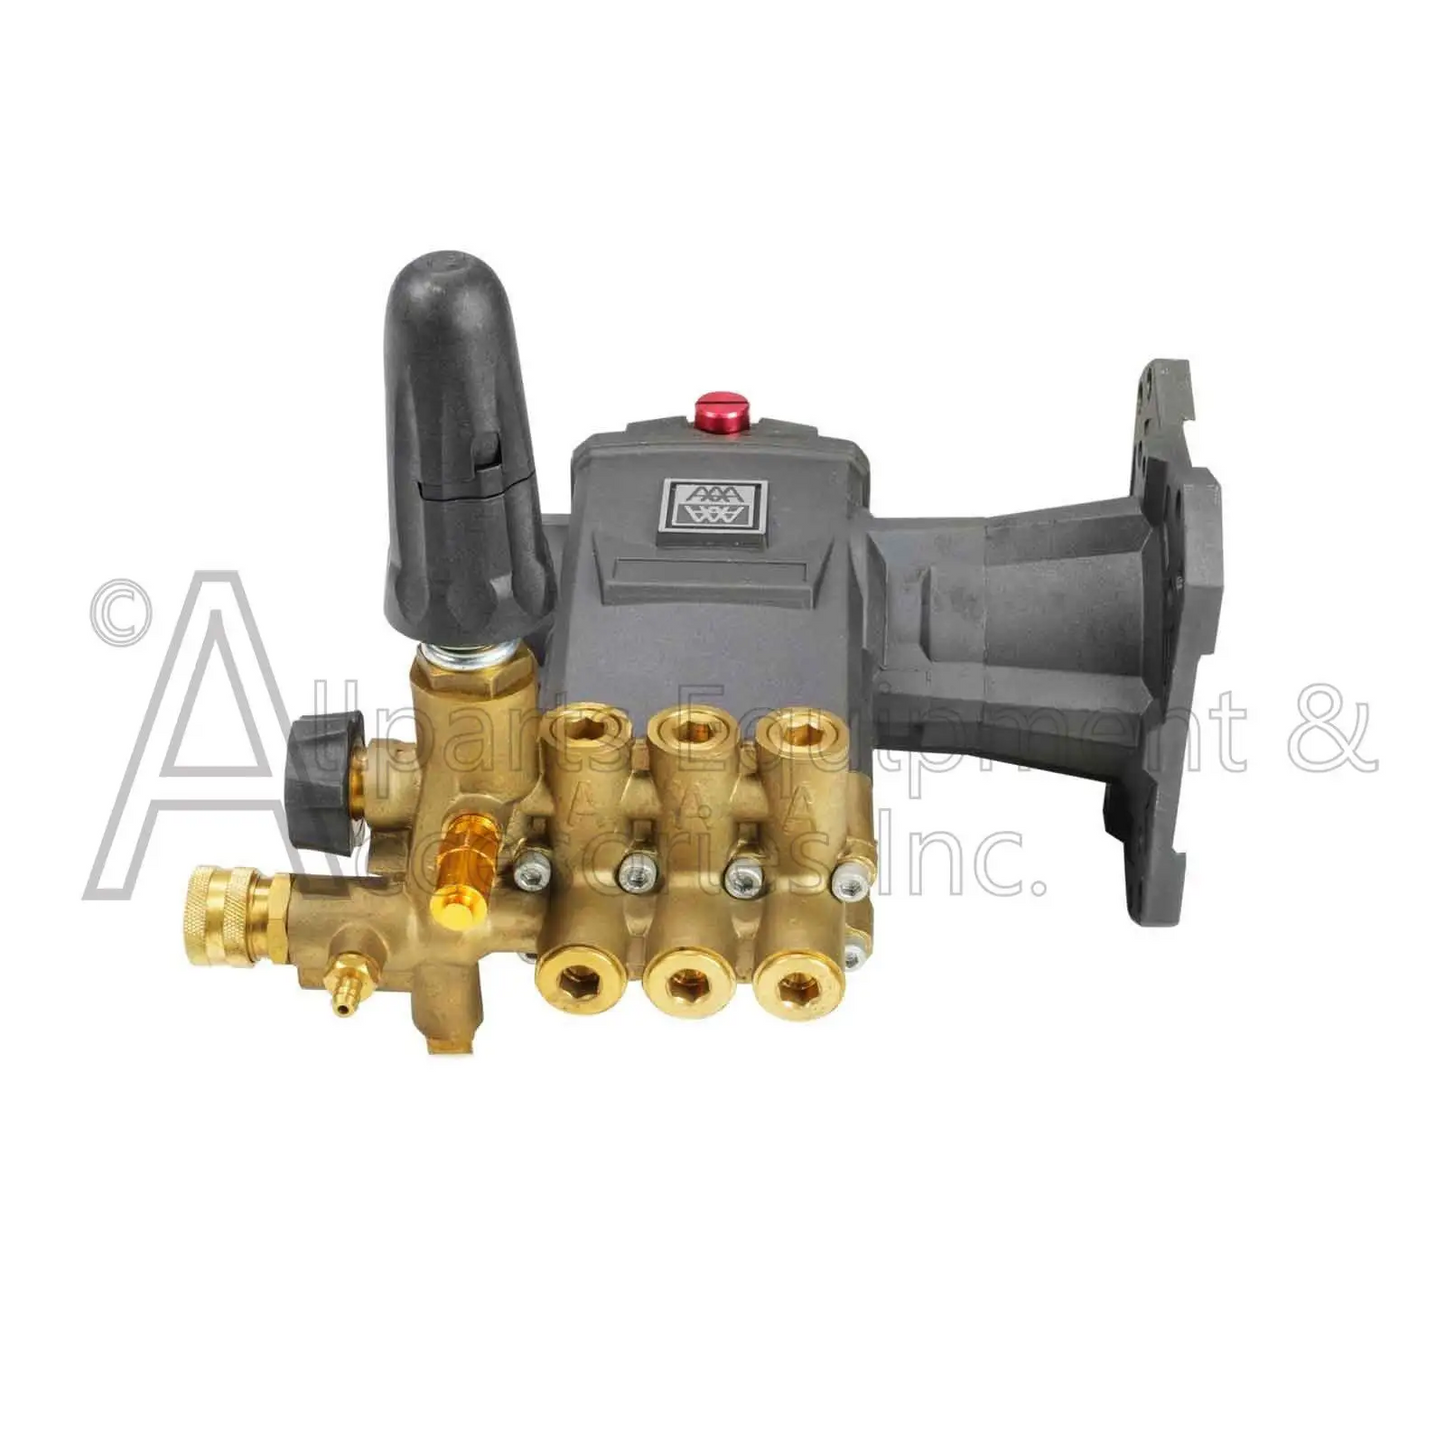 7109342 C45 Aaa Pump Service Assembly